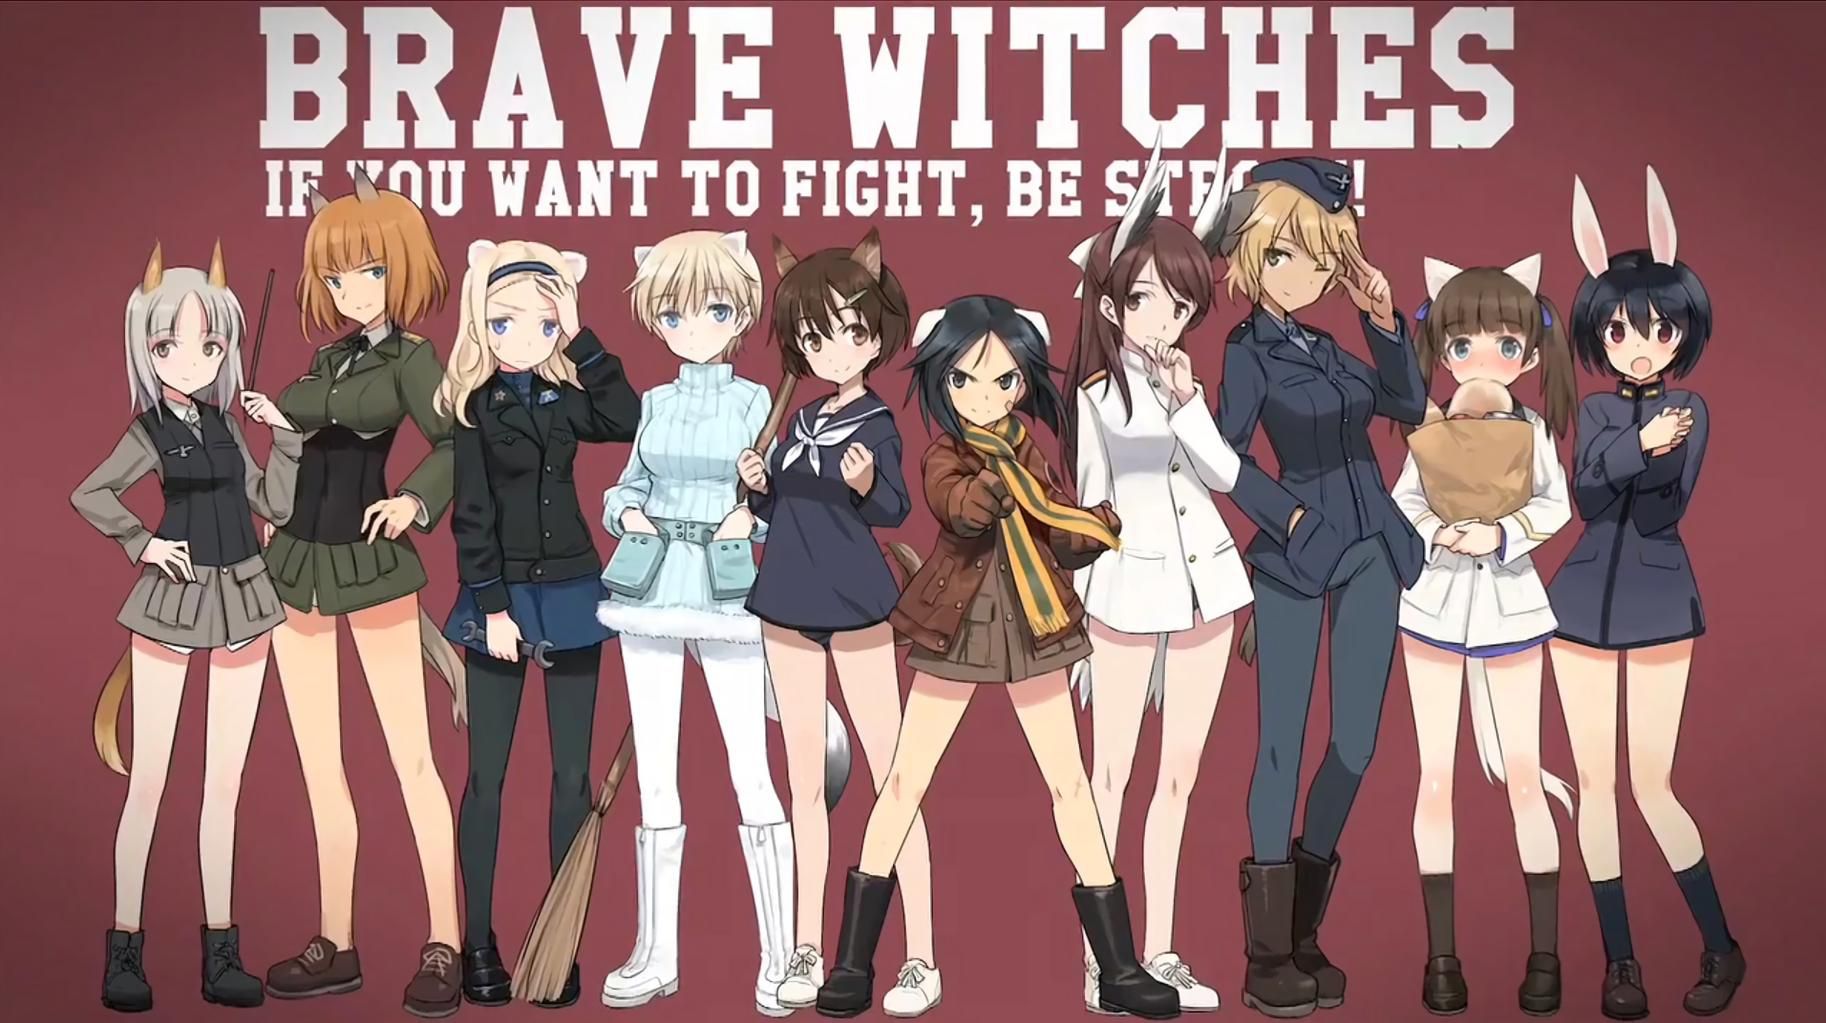 [Breaking] [strike Witches] new anime characters, all cute wwwwwww 1